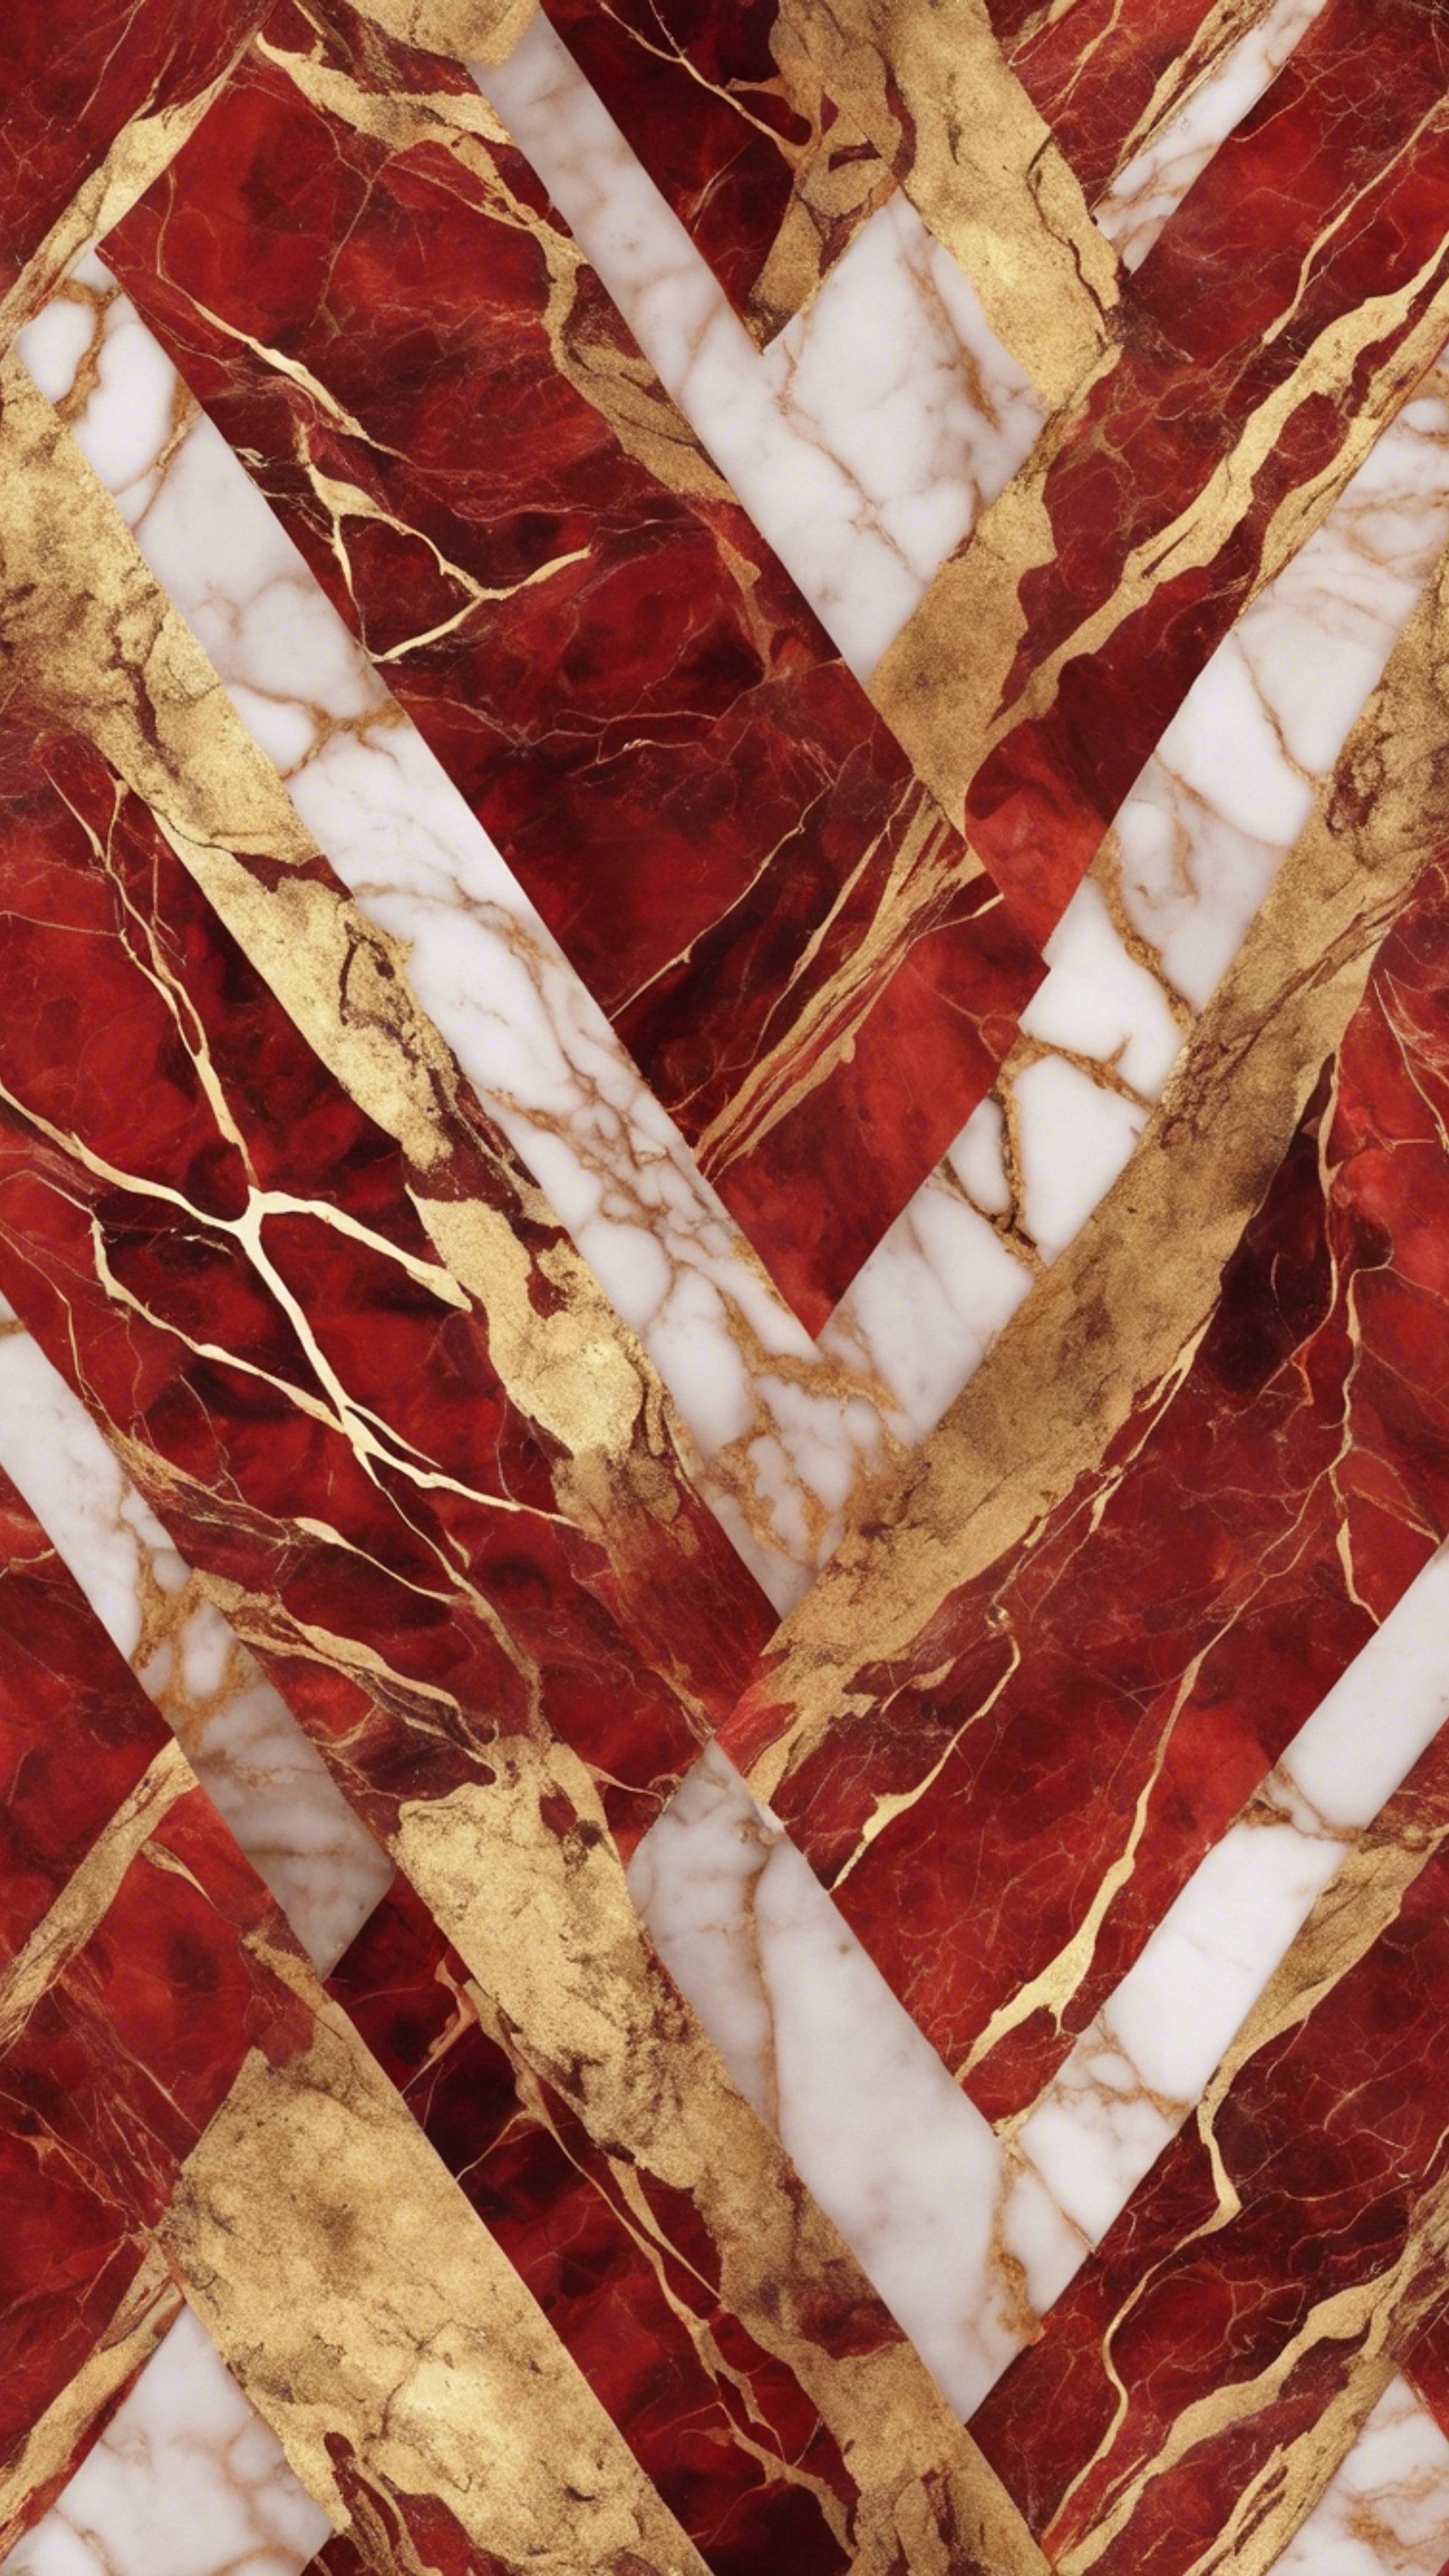 Bold red and gold marble texture overlaying in a harmonious pattern. Tapeta[6b8ff204784241b383b6]